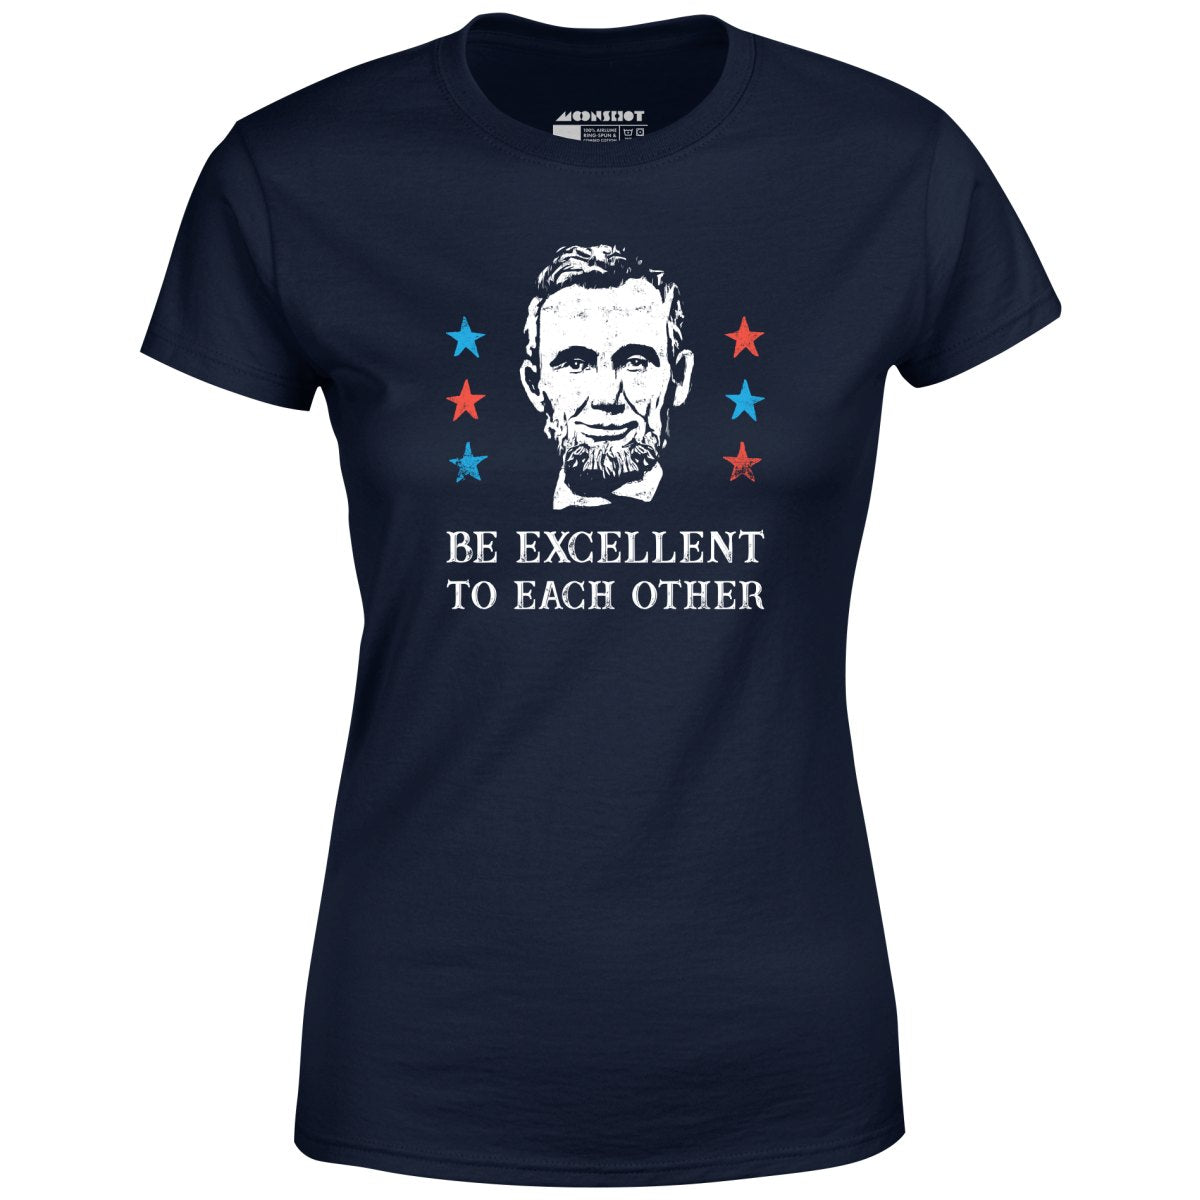 Be Excellent To Each Other - Women's T-Shirt